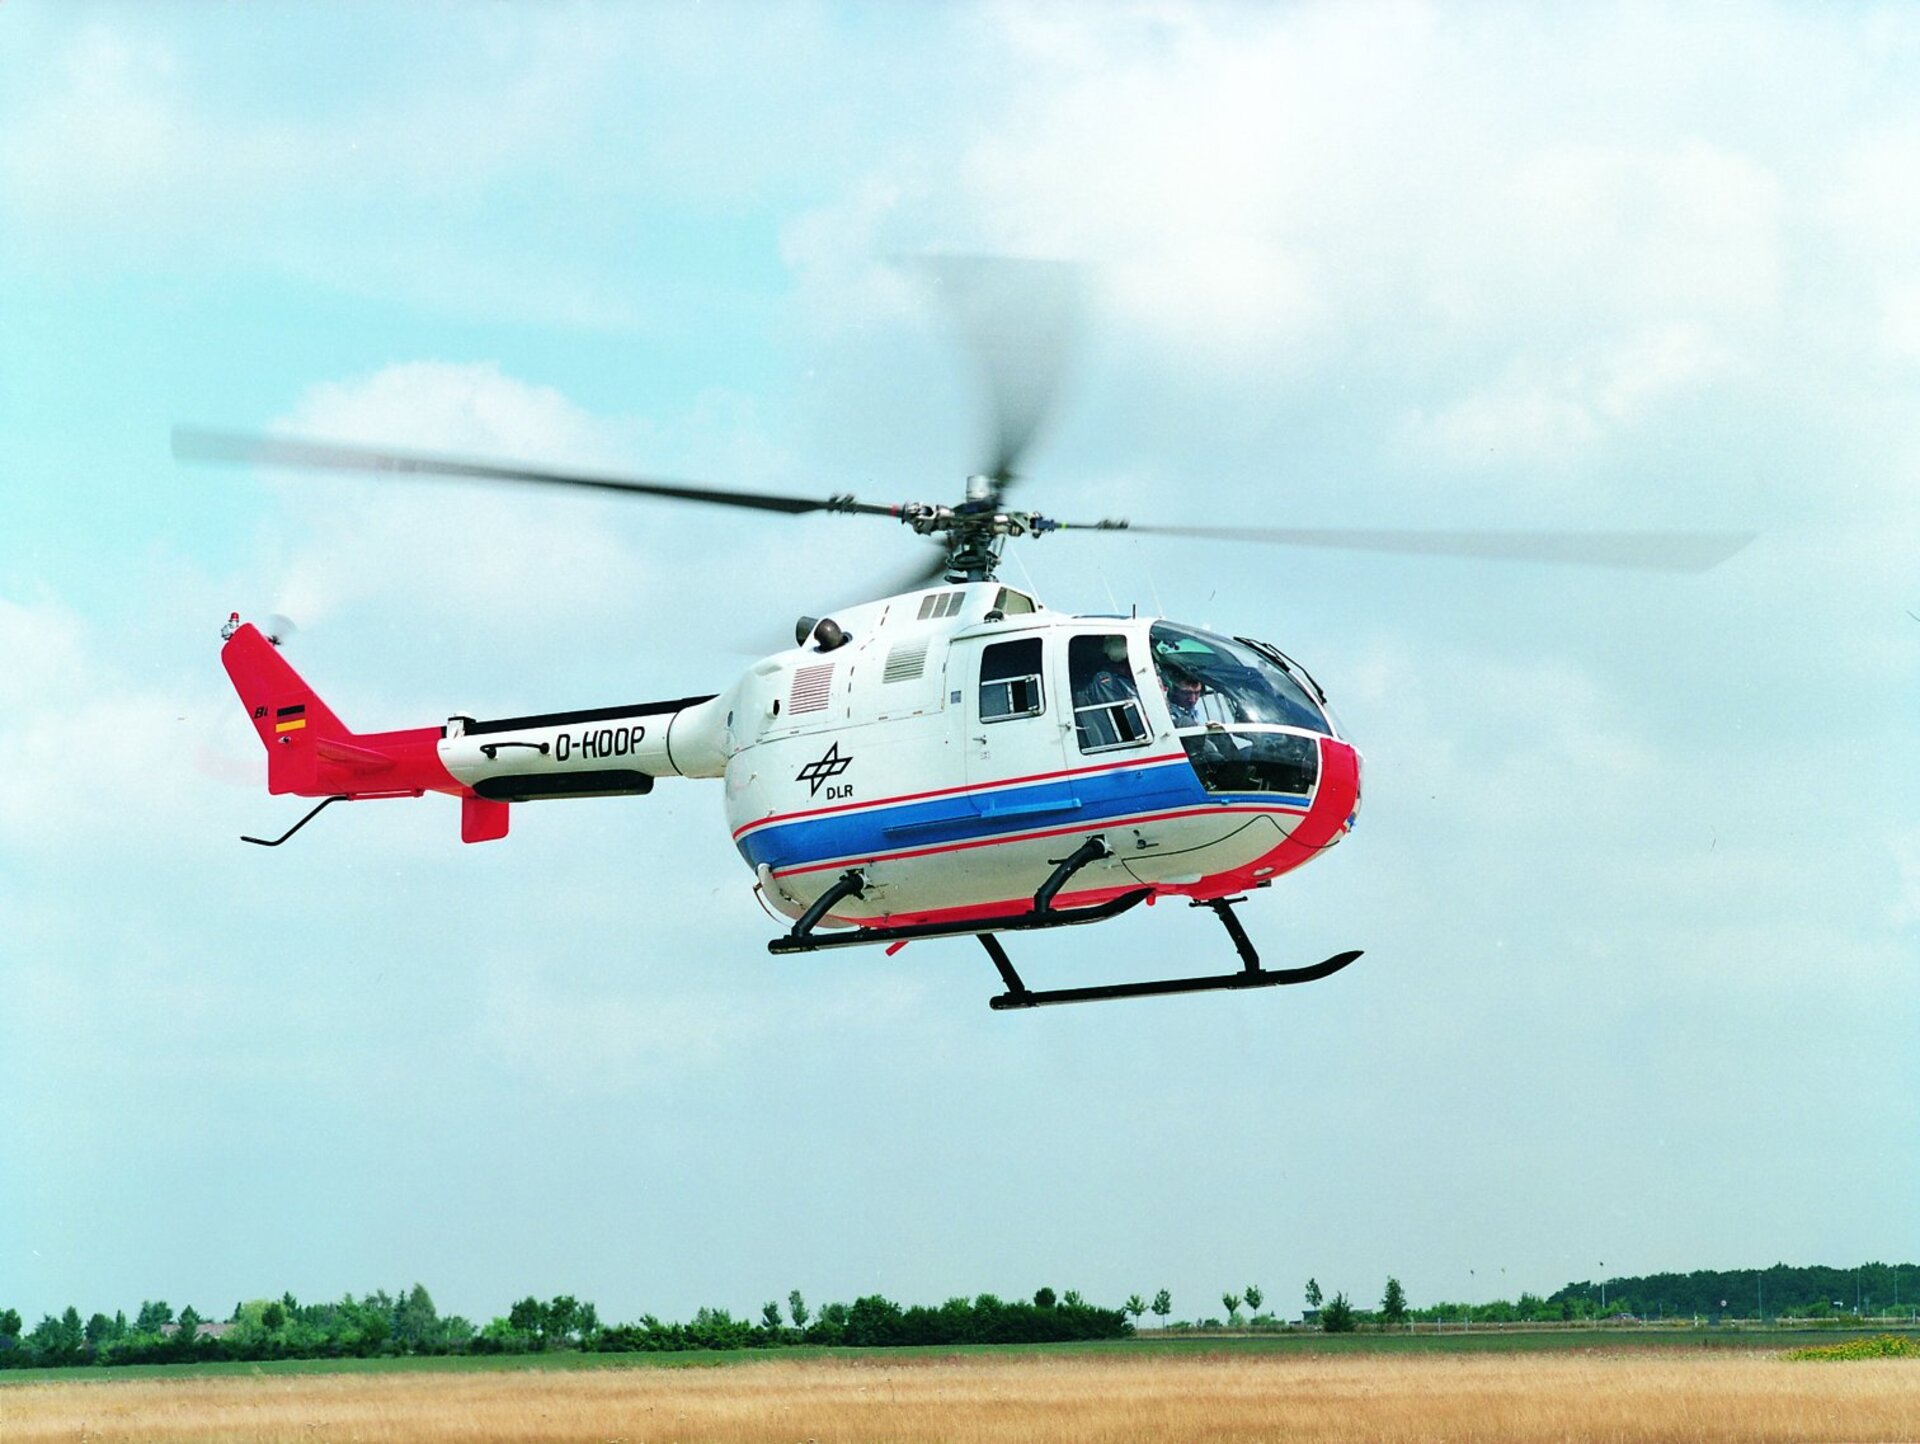 The helicopter BO 105 Cis used by DLR